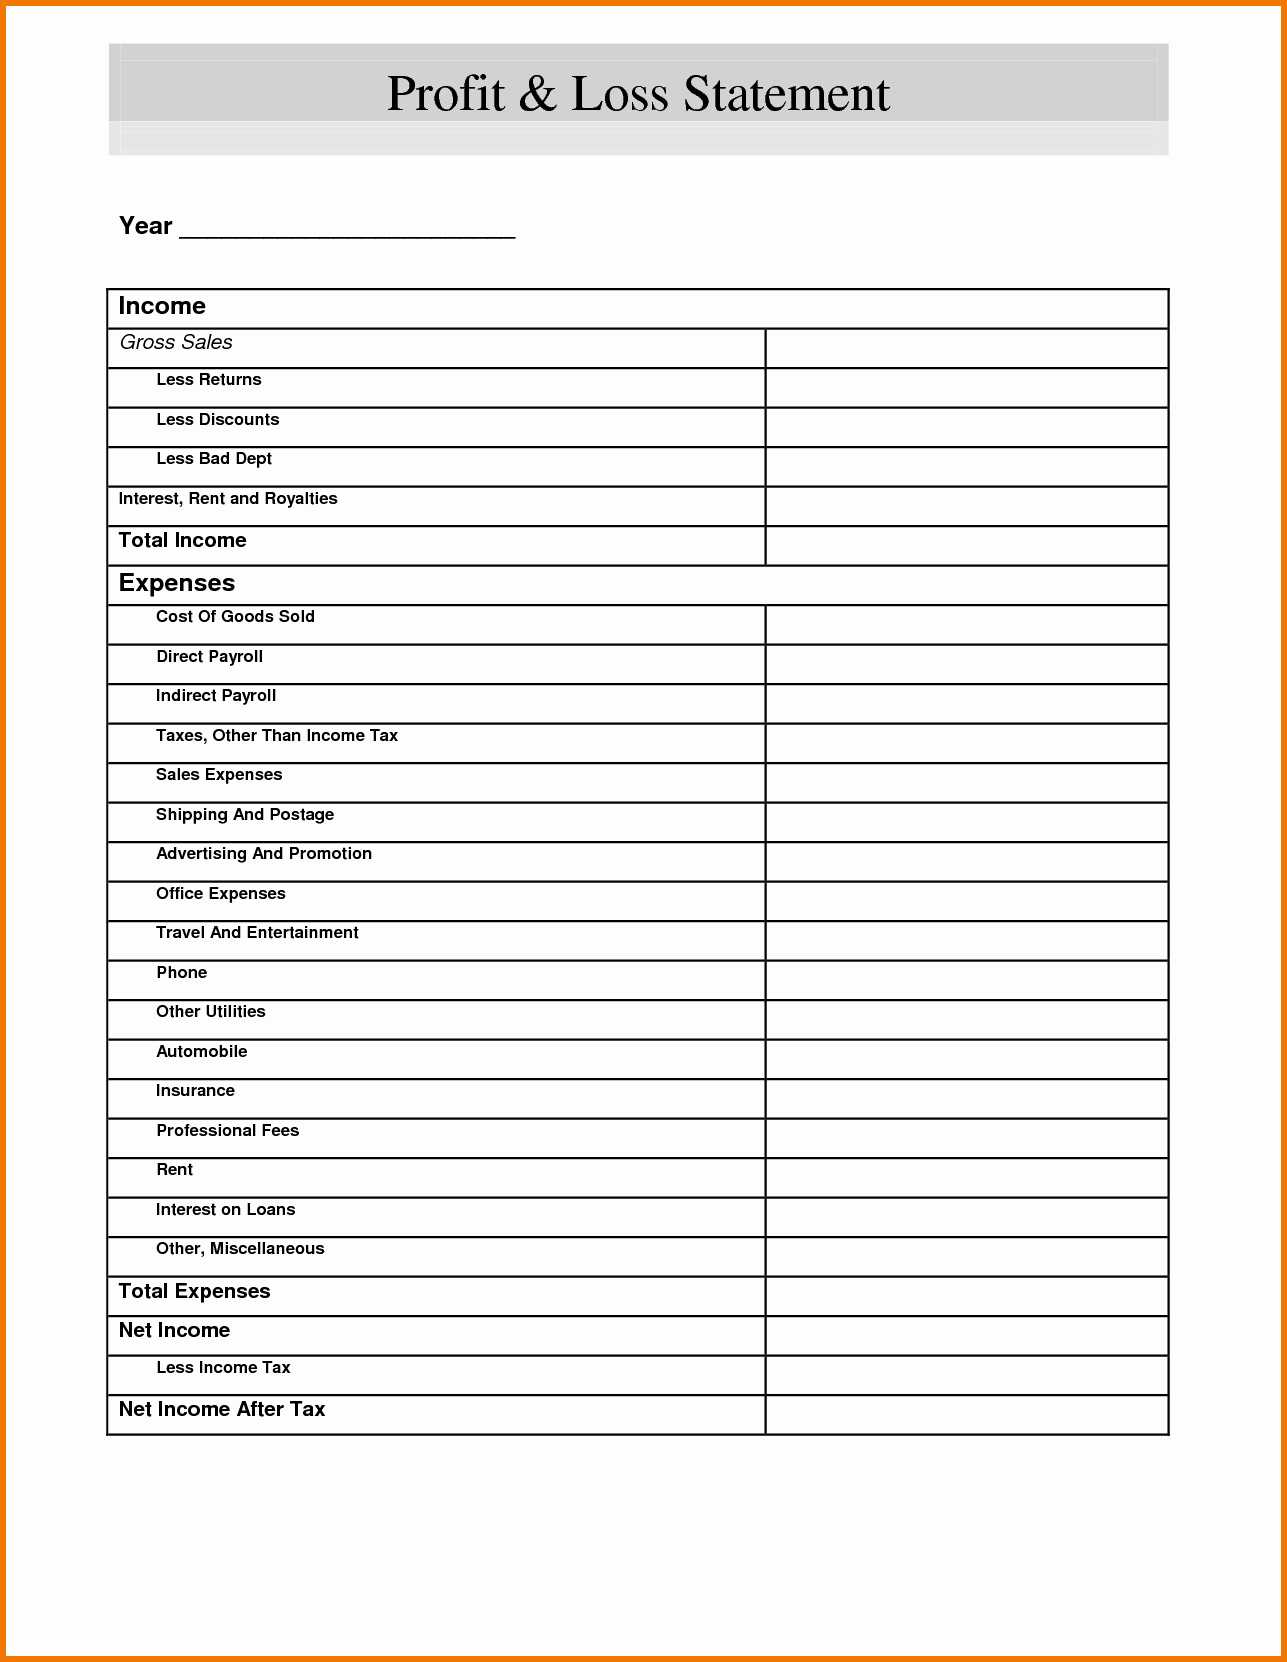 Profit and Loss Statement Template Free Download